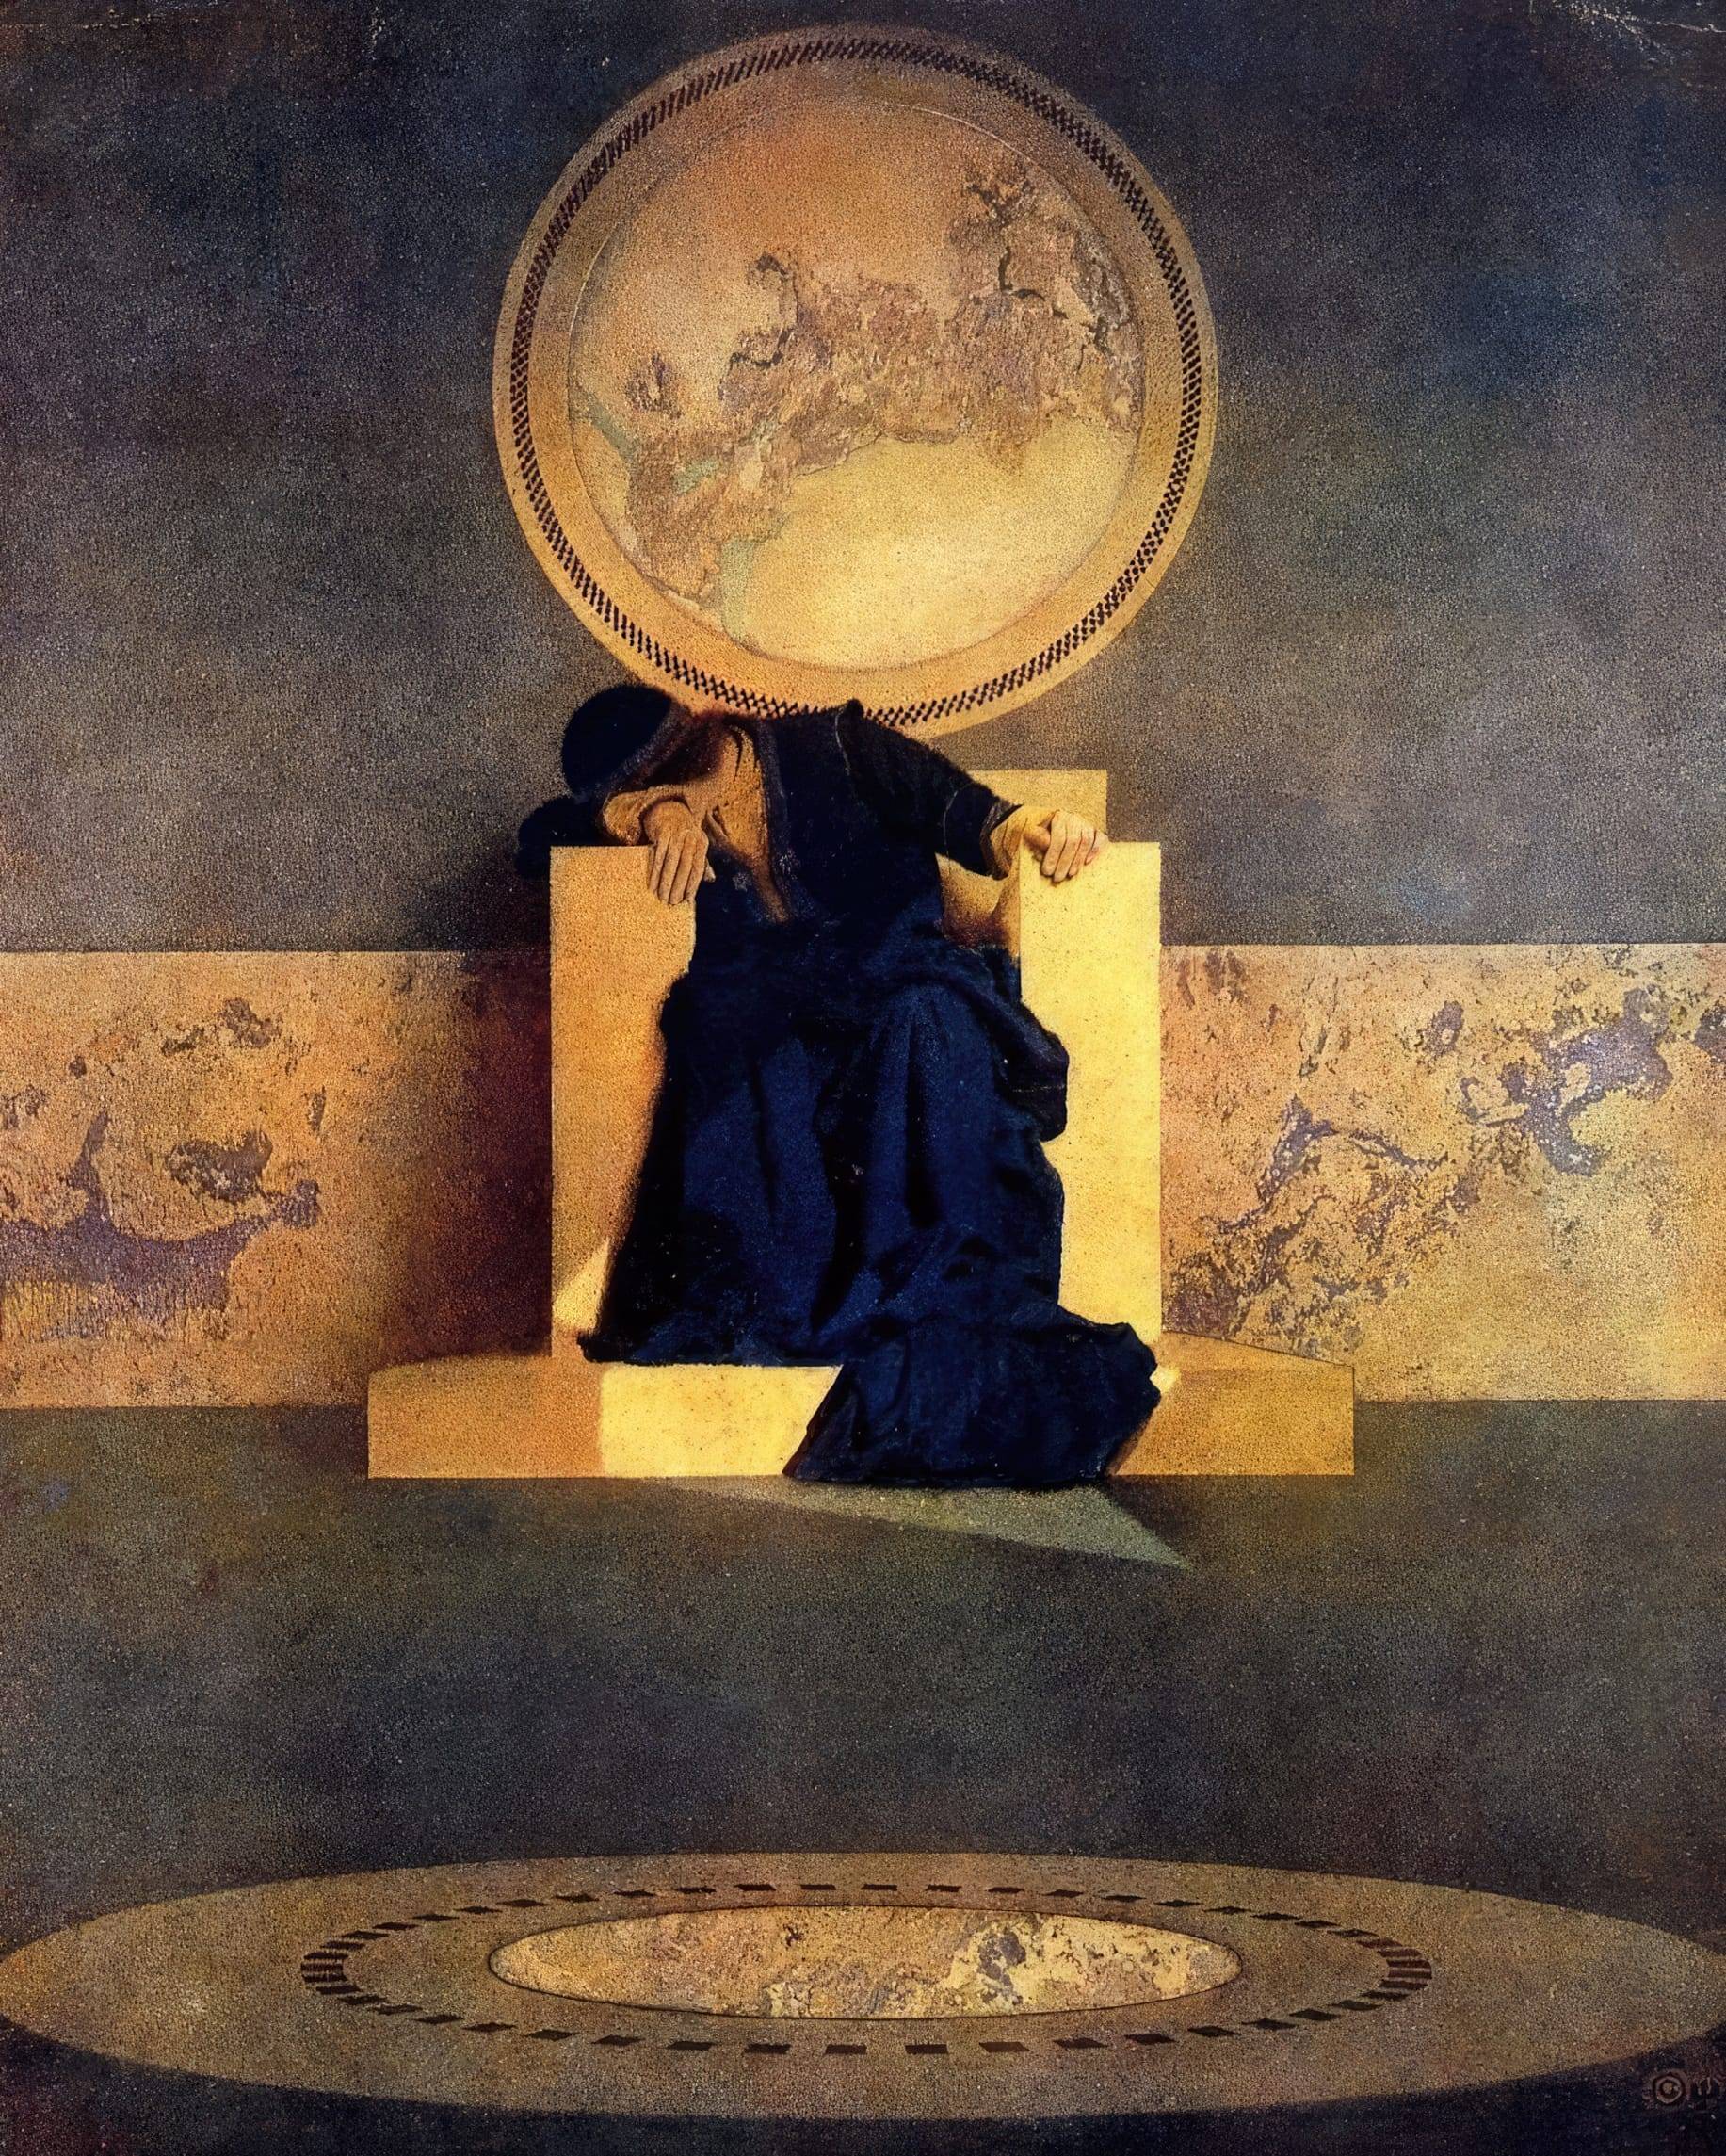 Maxfield Parrish – The Young King of the Black Isles (1906)